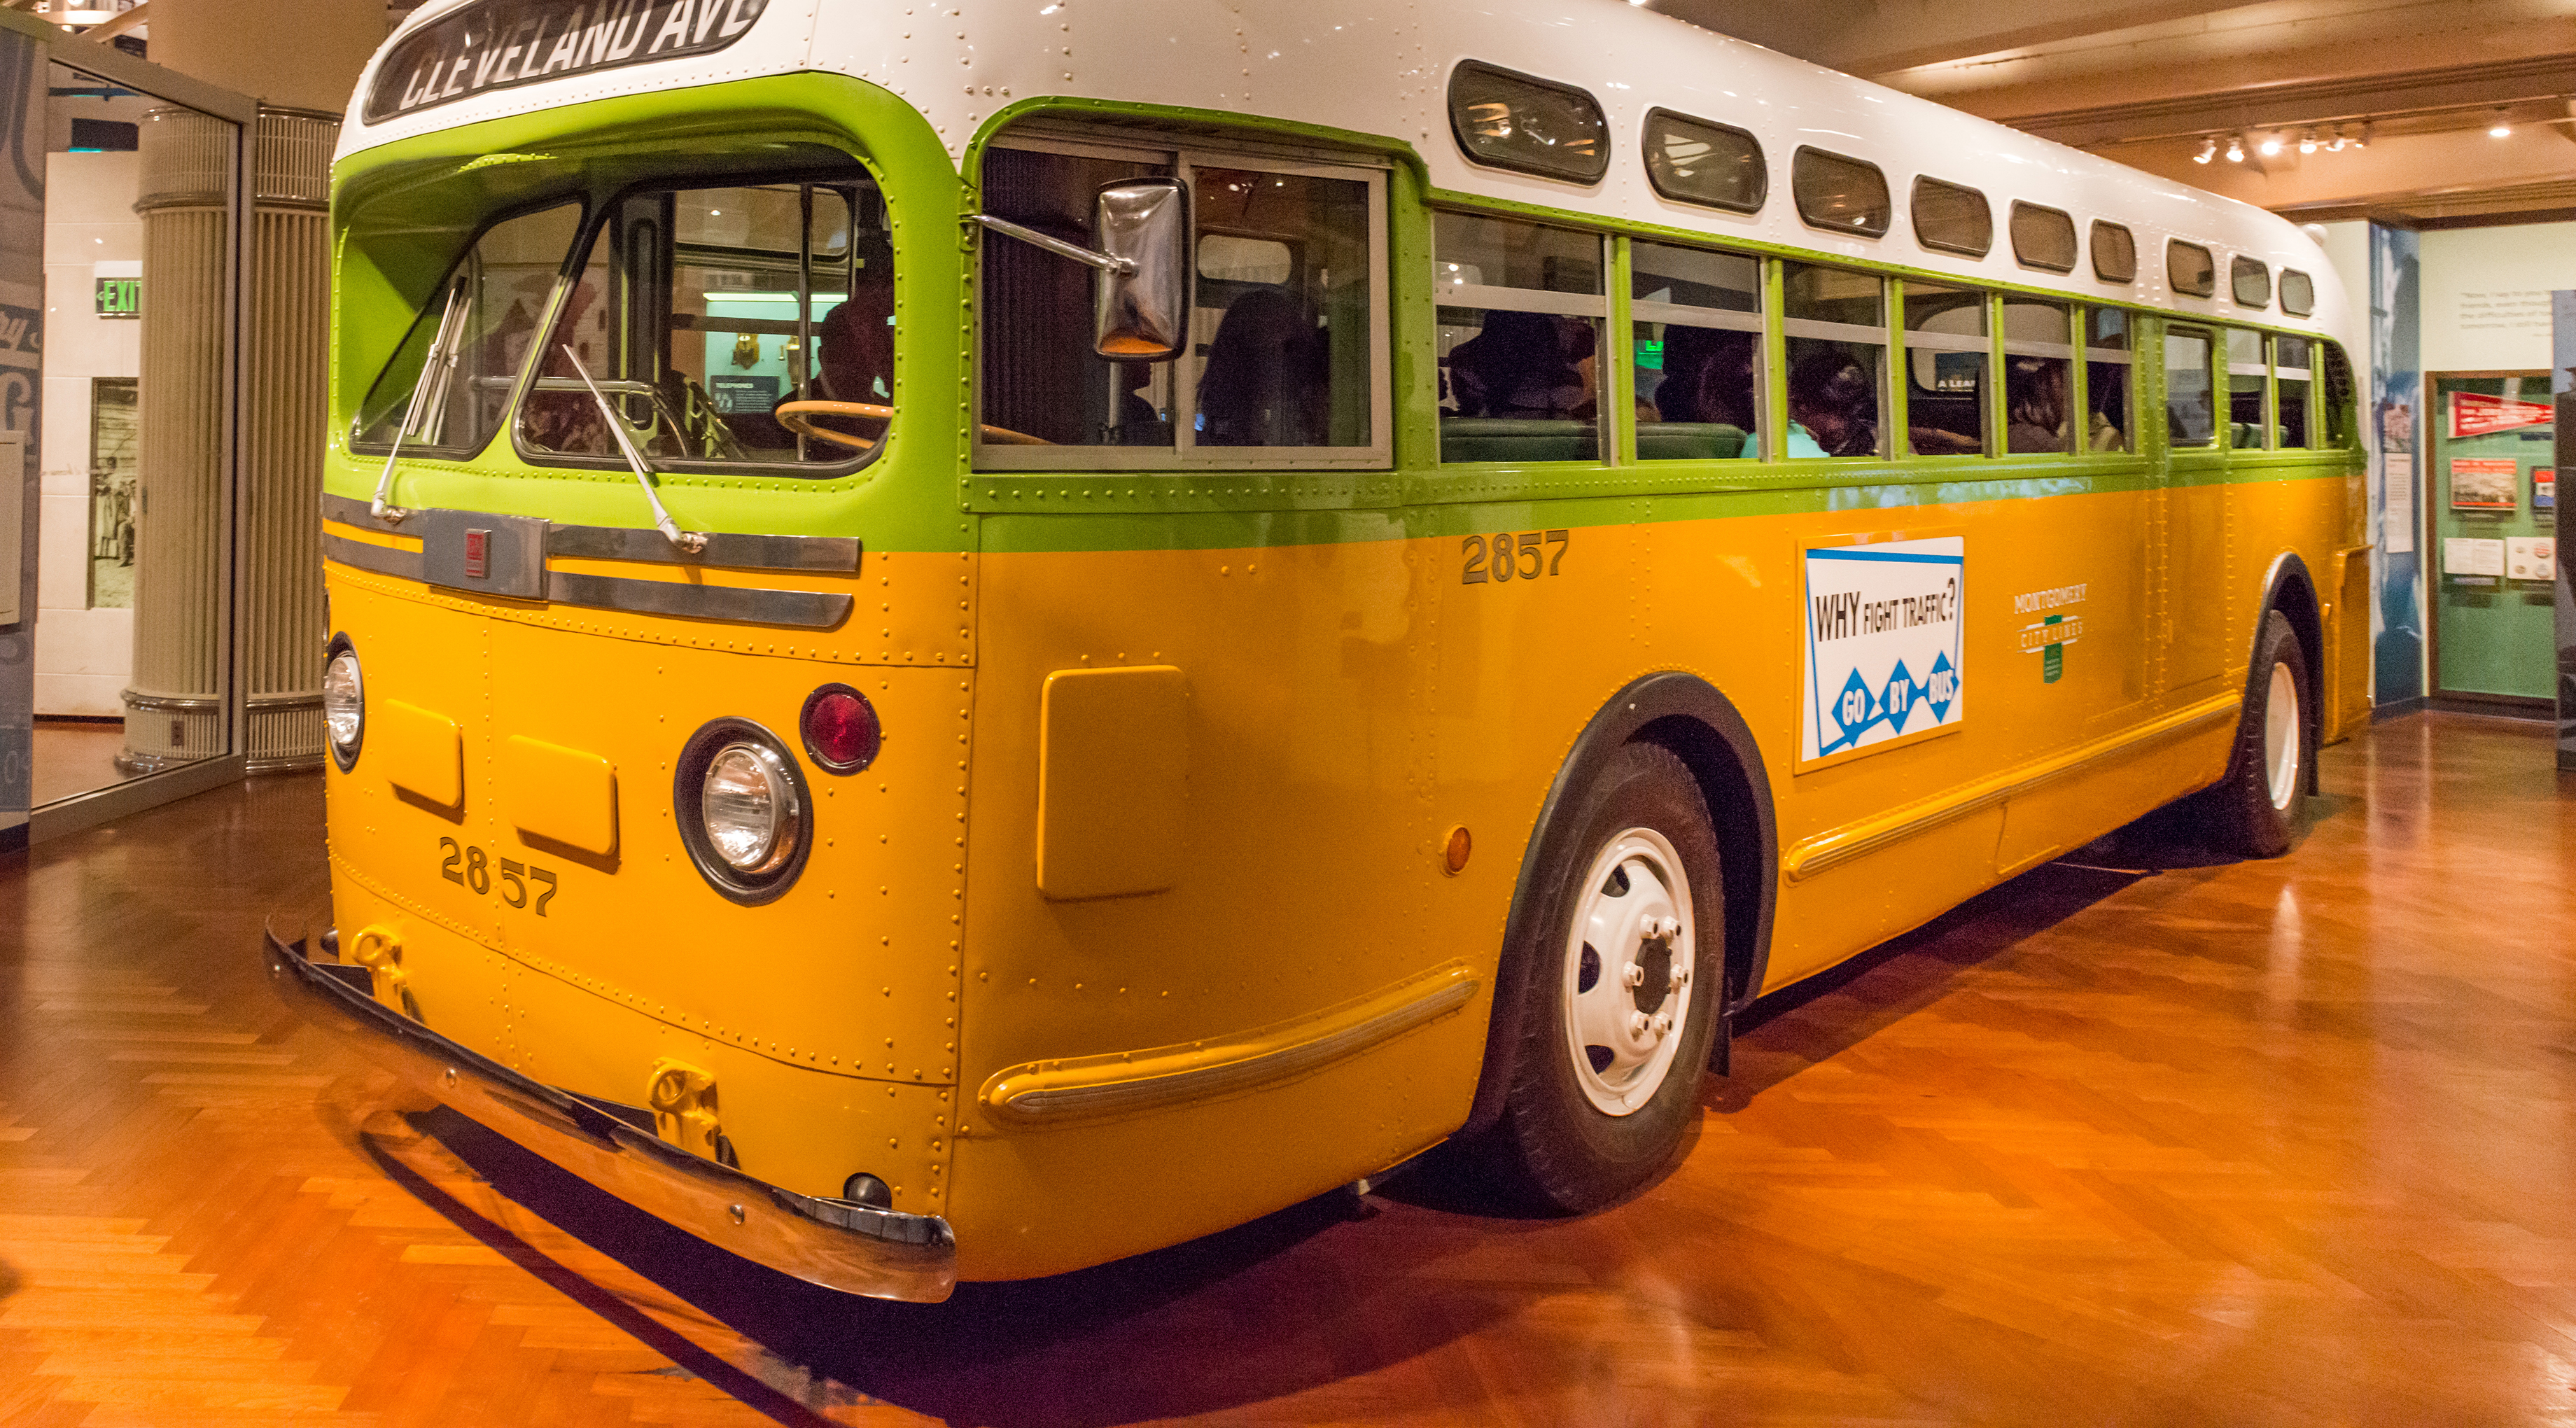 Rosa Parks bus at Henry Ford Museum